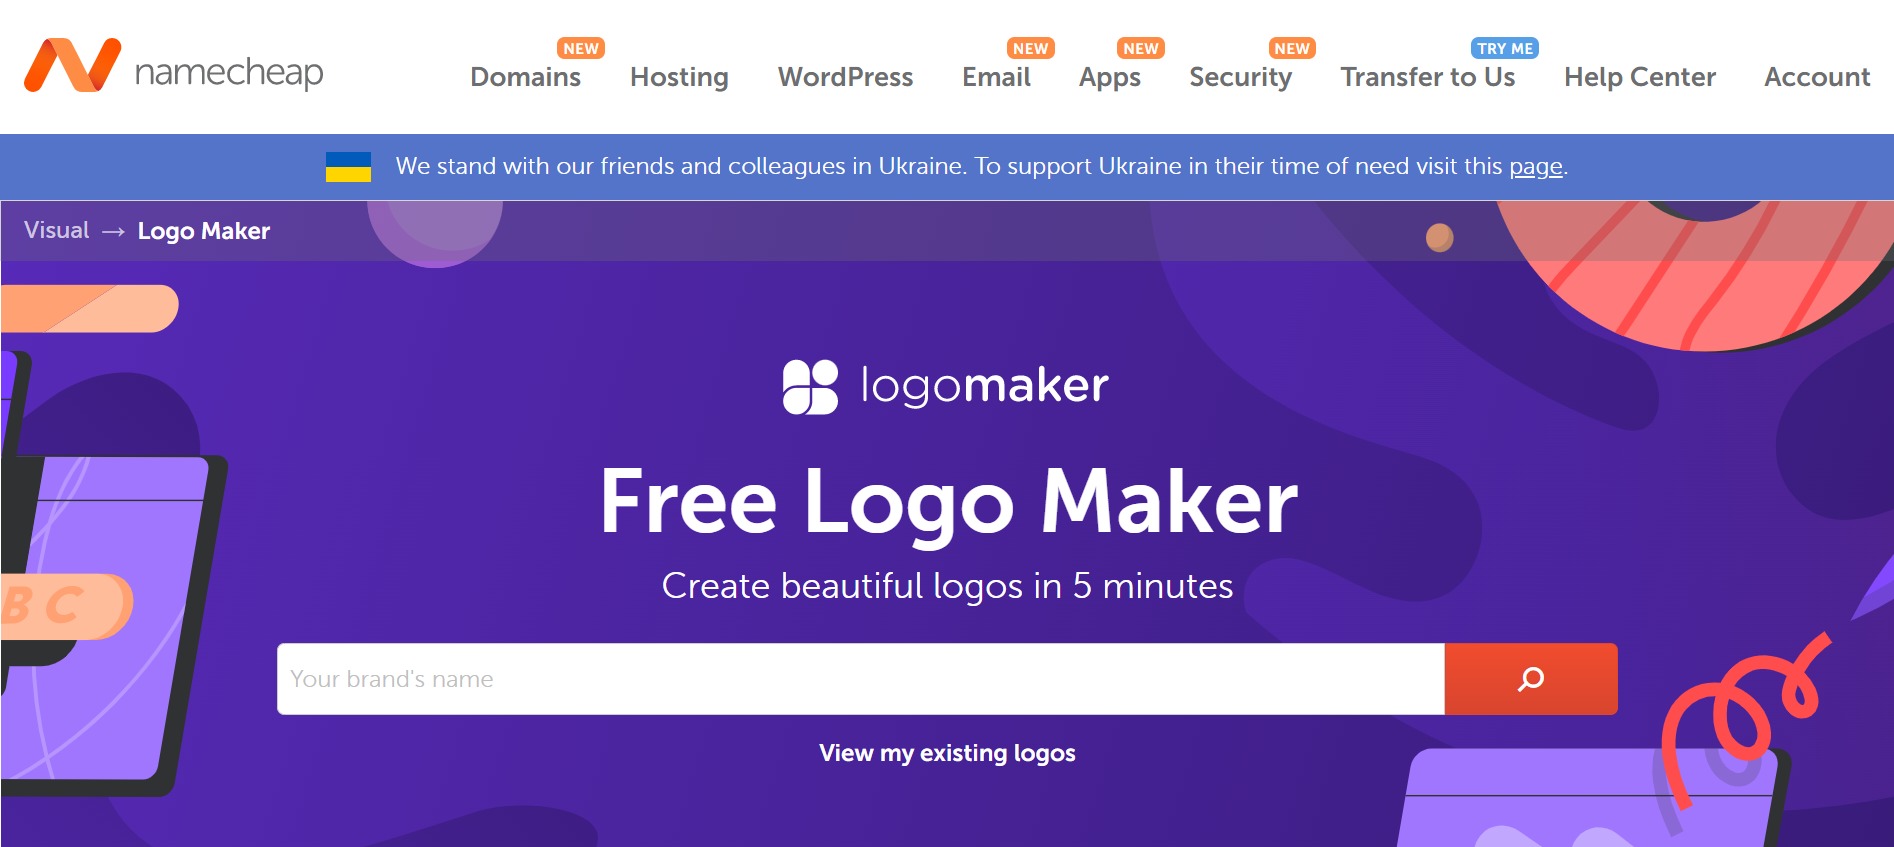 Get Your Business Logo in Seconds with Namecheap.com’s Free Logo Maker Tool